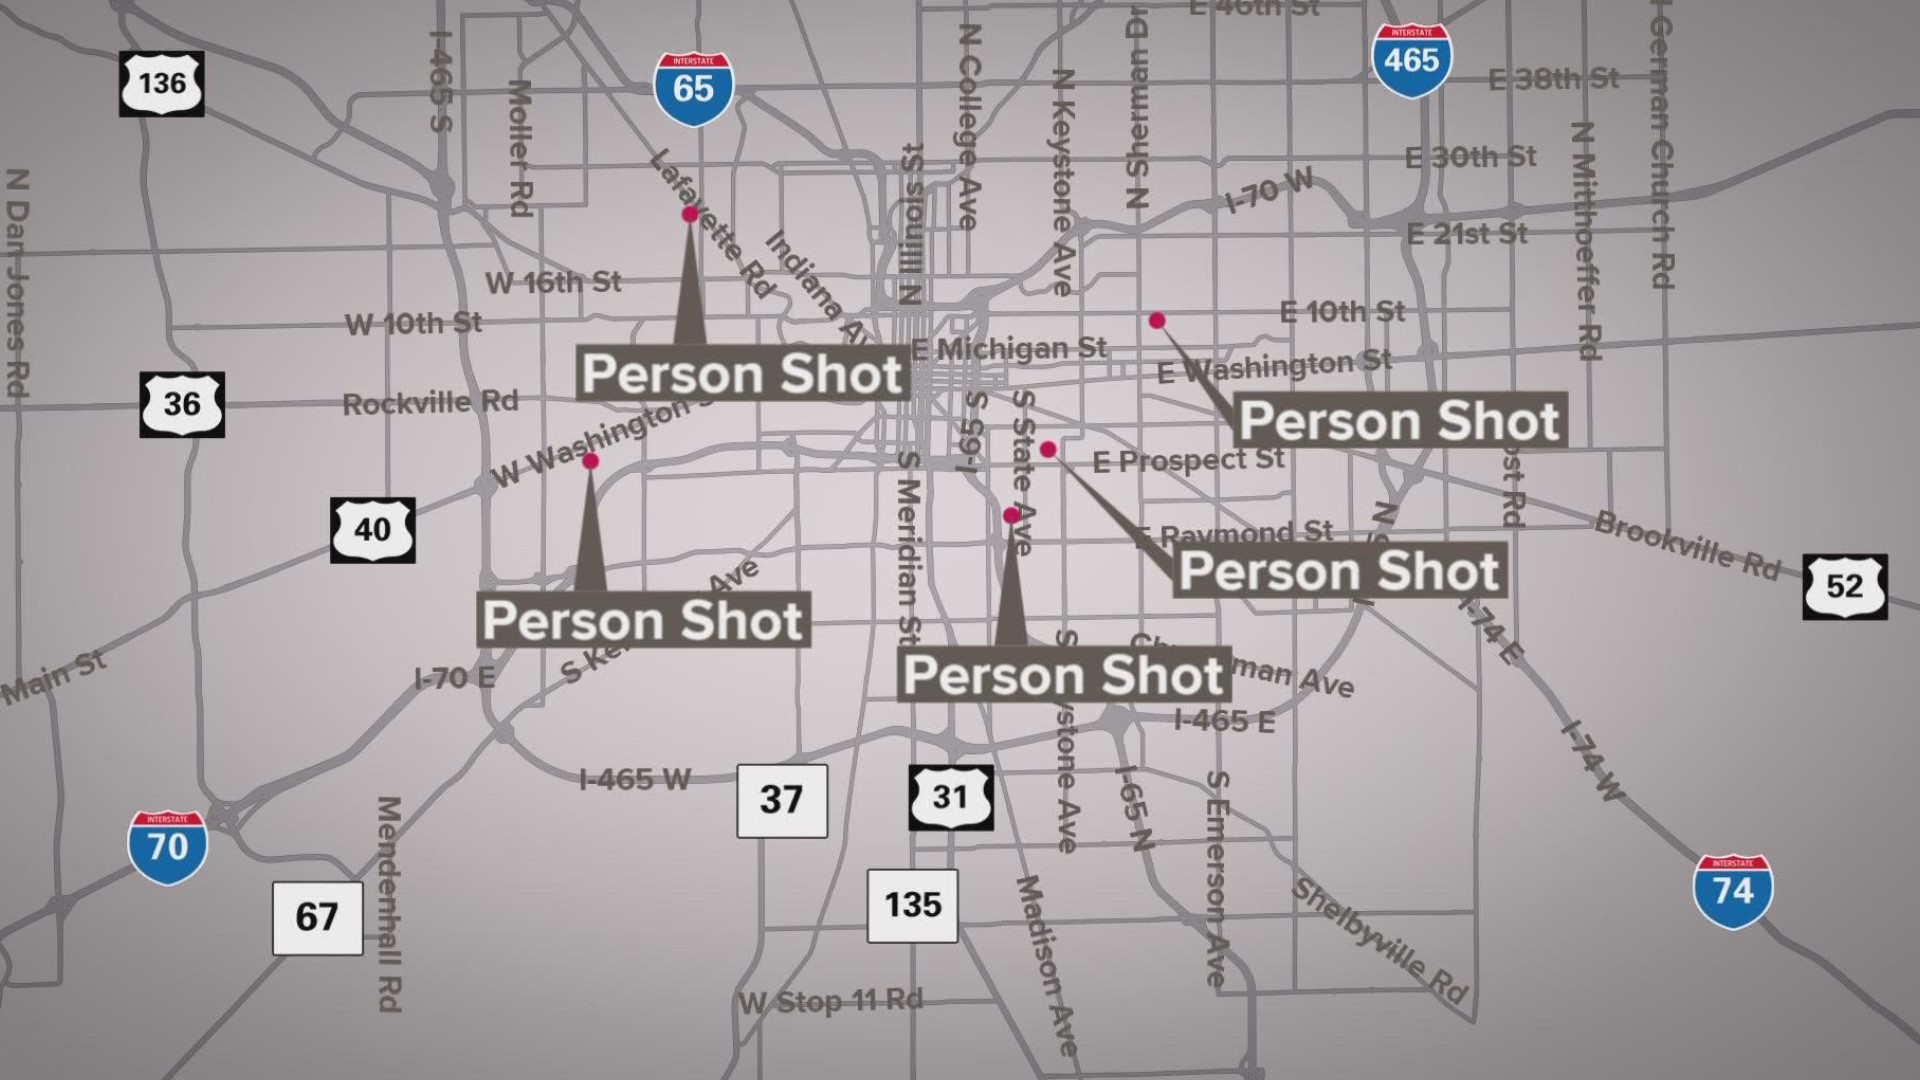 IMPD Aggravated Assault detectives were called to investigate five shootings in the first seven hours of New Year's Day.